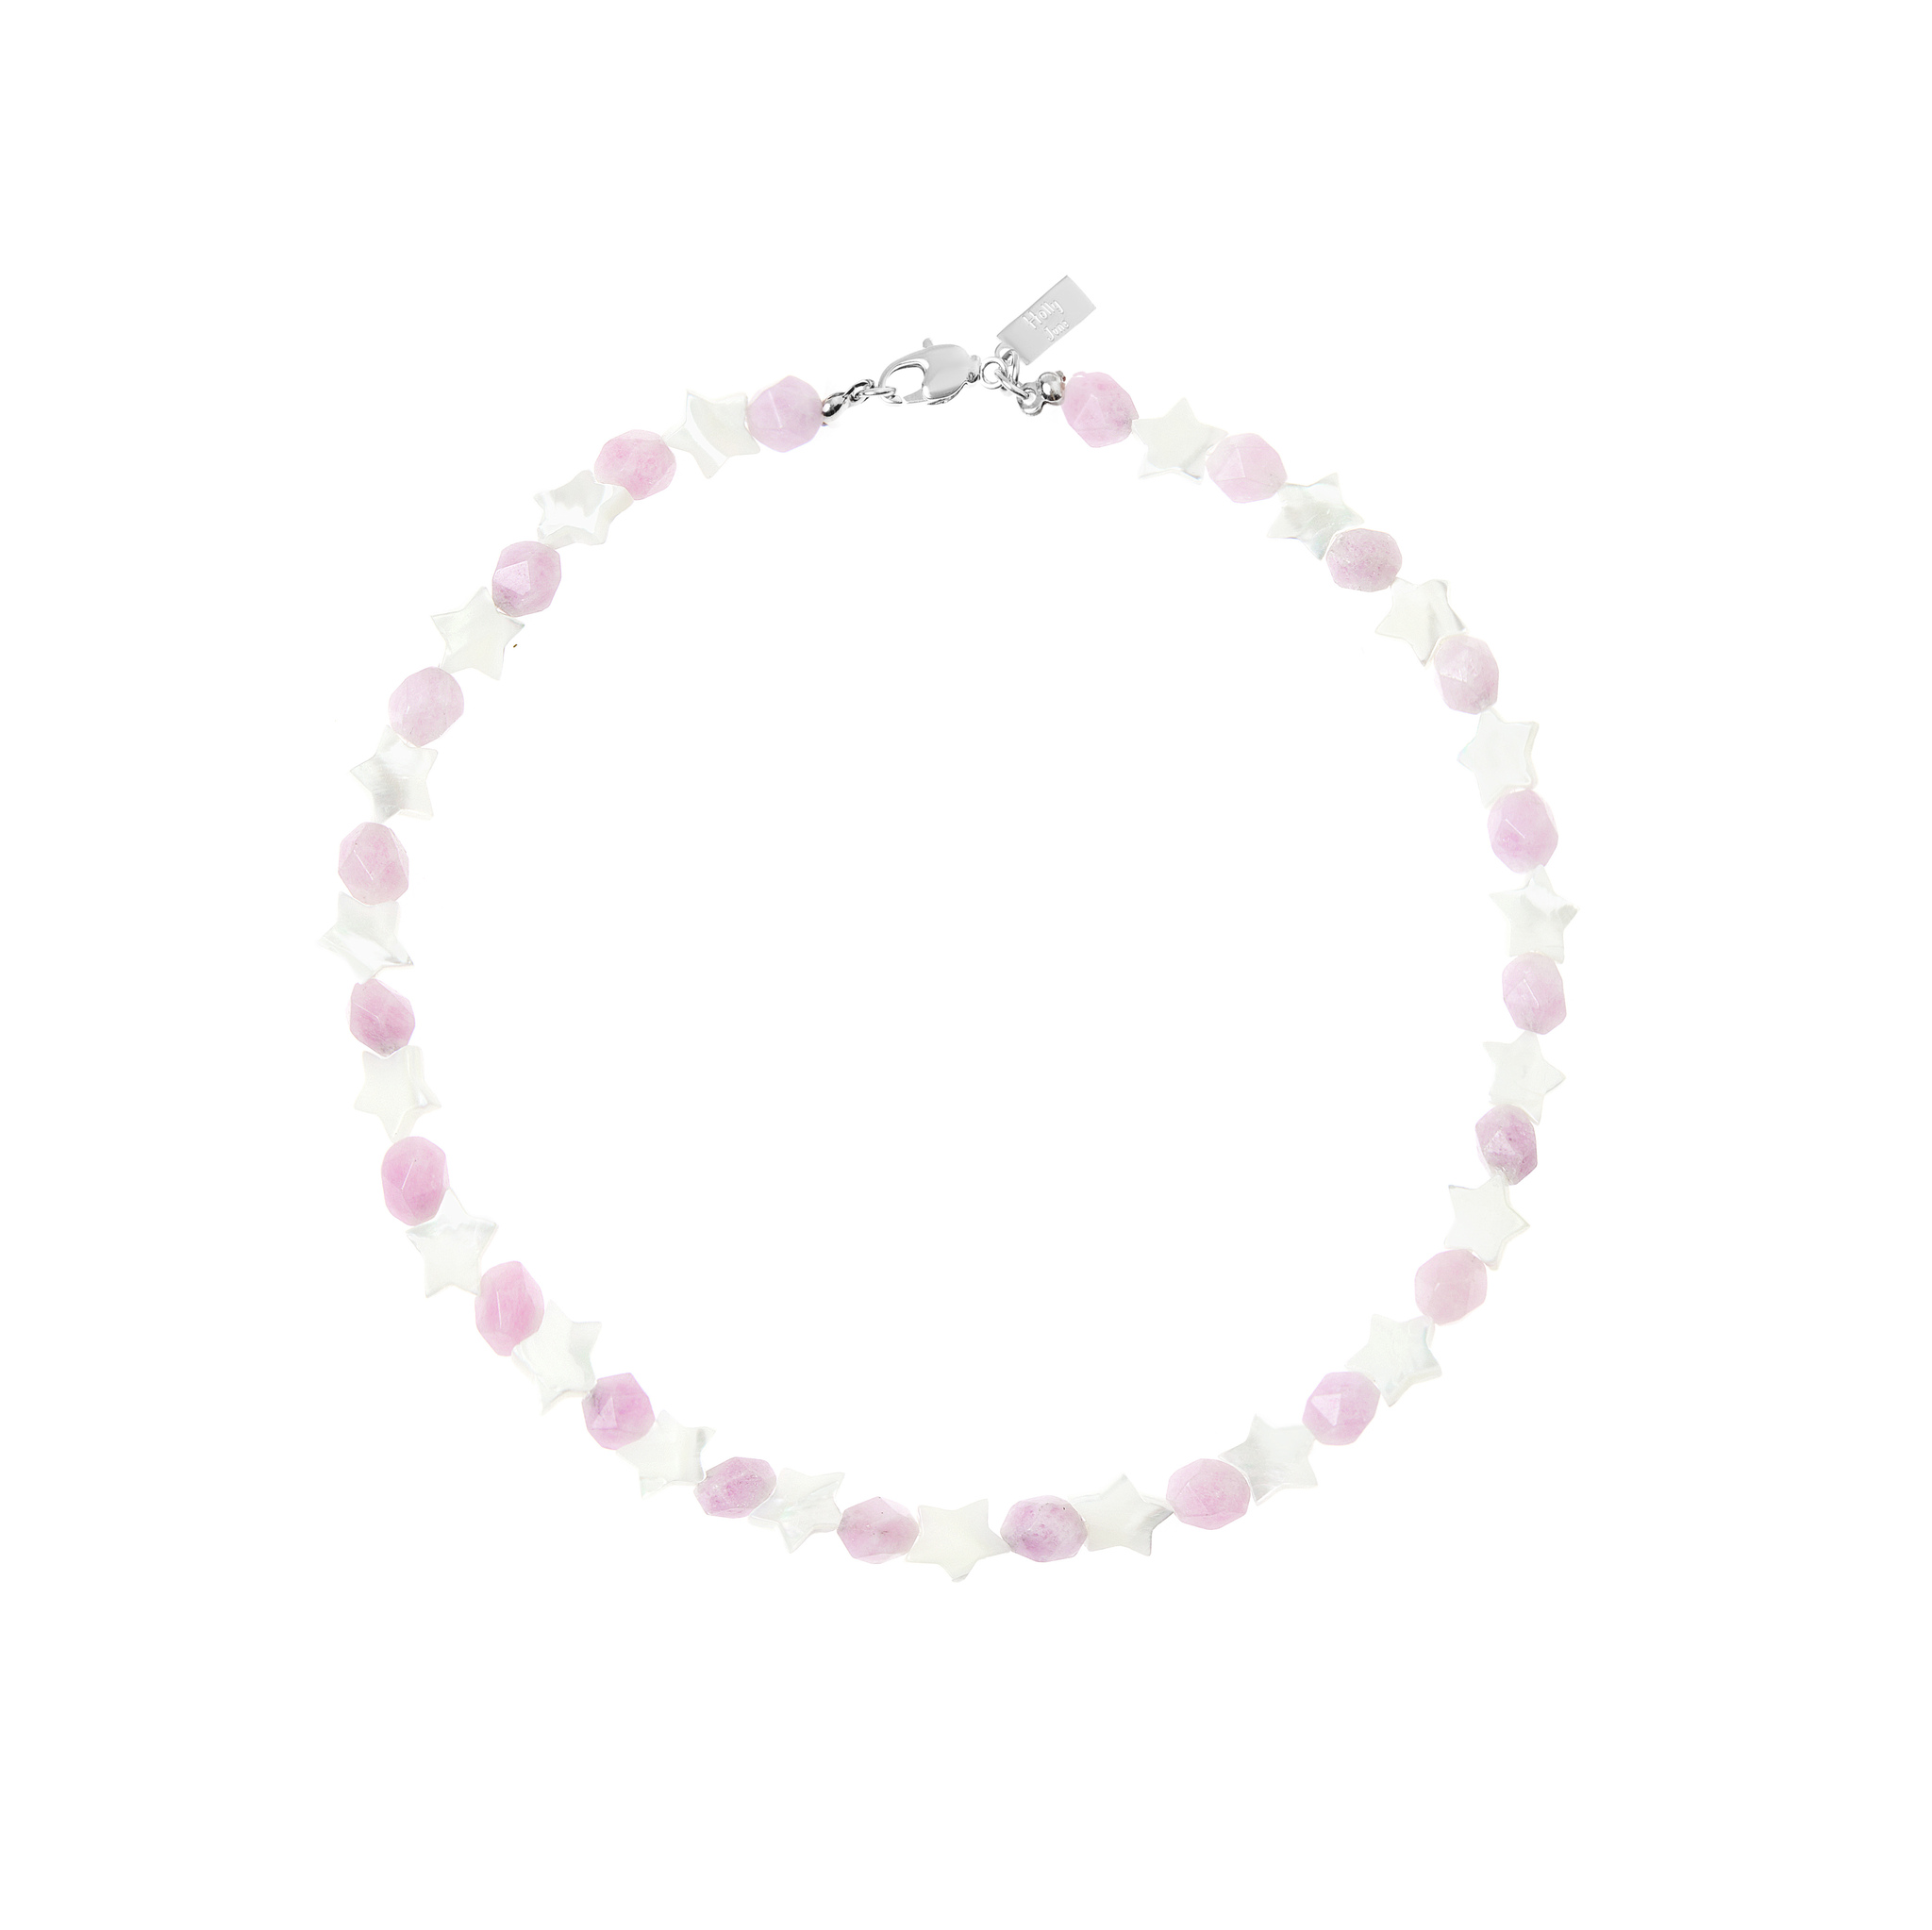 HOLLY JUNE Колье Candy Star Necklace – Lilac holly june колье candy star necklace – lilac